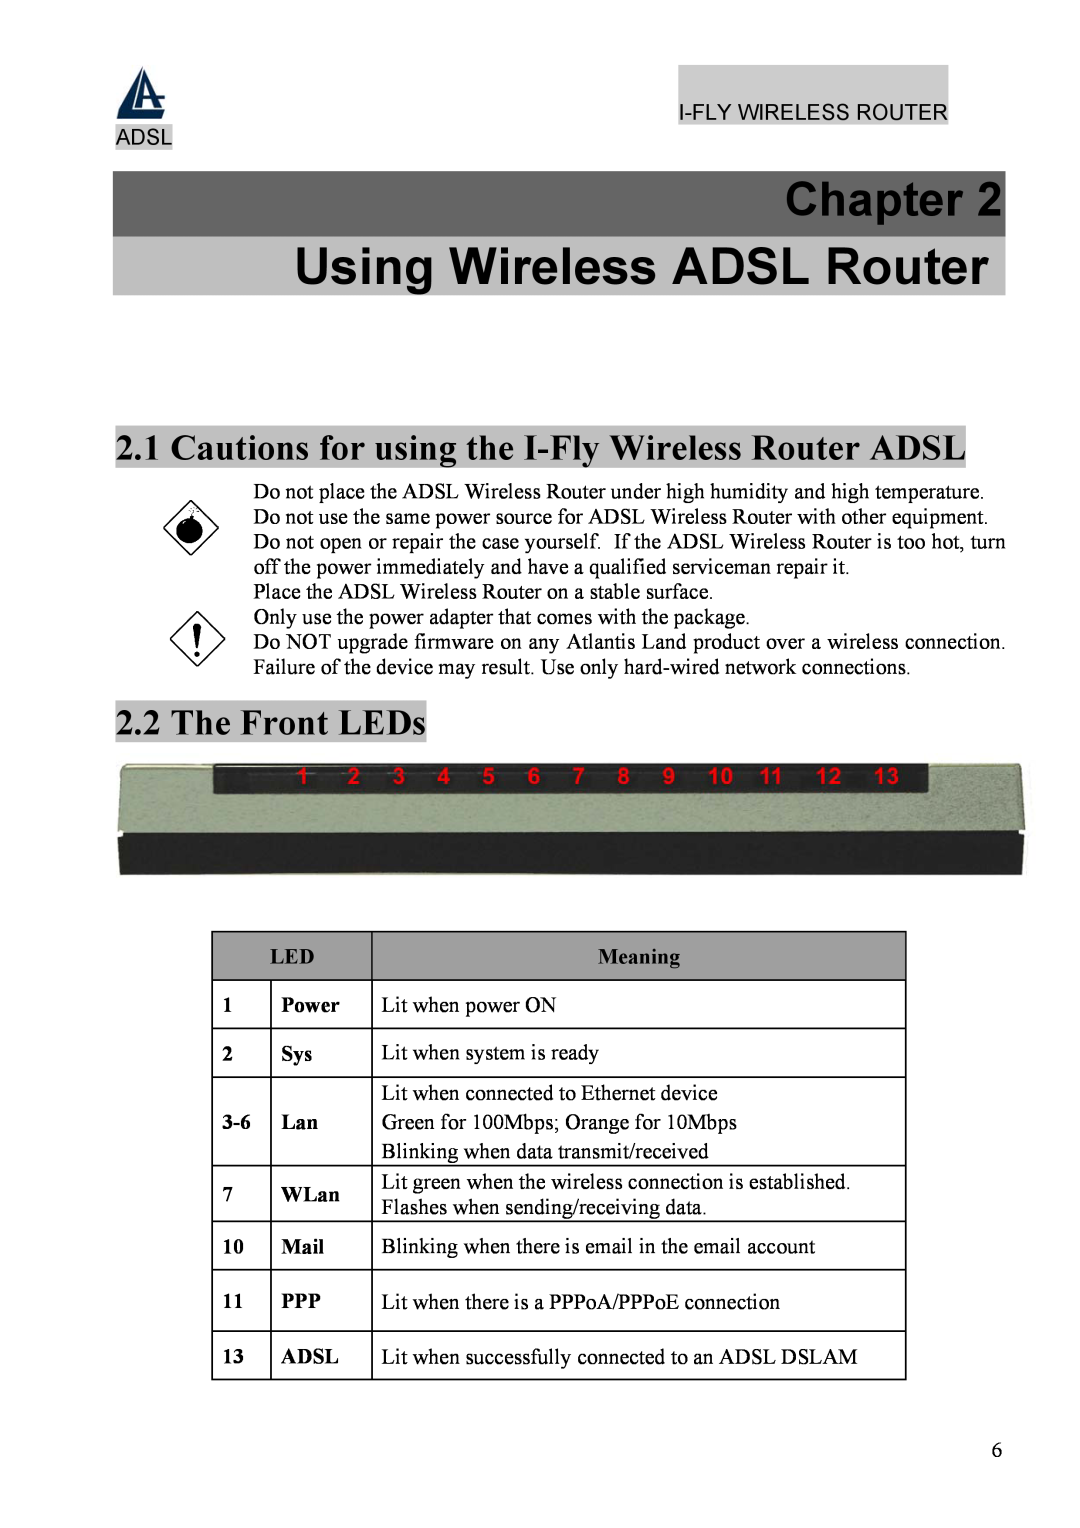 Atlantis Land A02-WRA4-54G Using Wireless ADSL Router, Cautions for using the I-Fly Wireless Router ADSL, The Front LEDs 